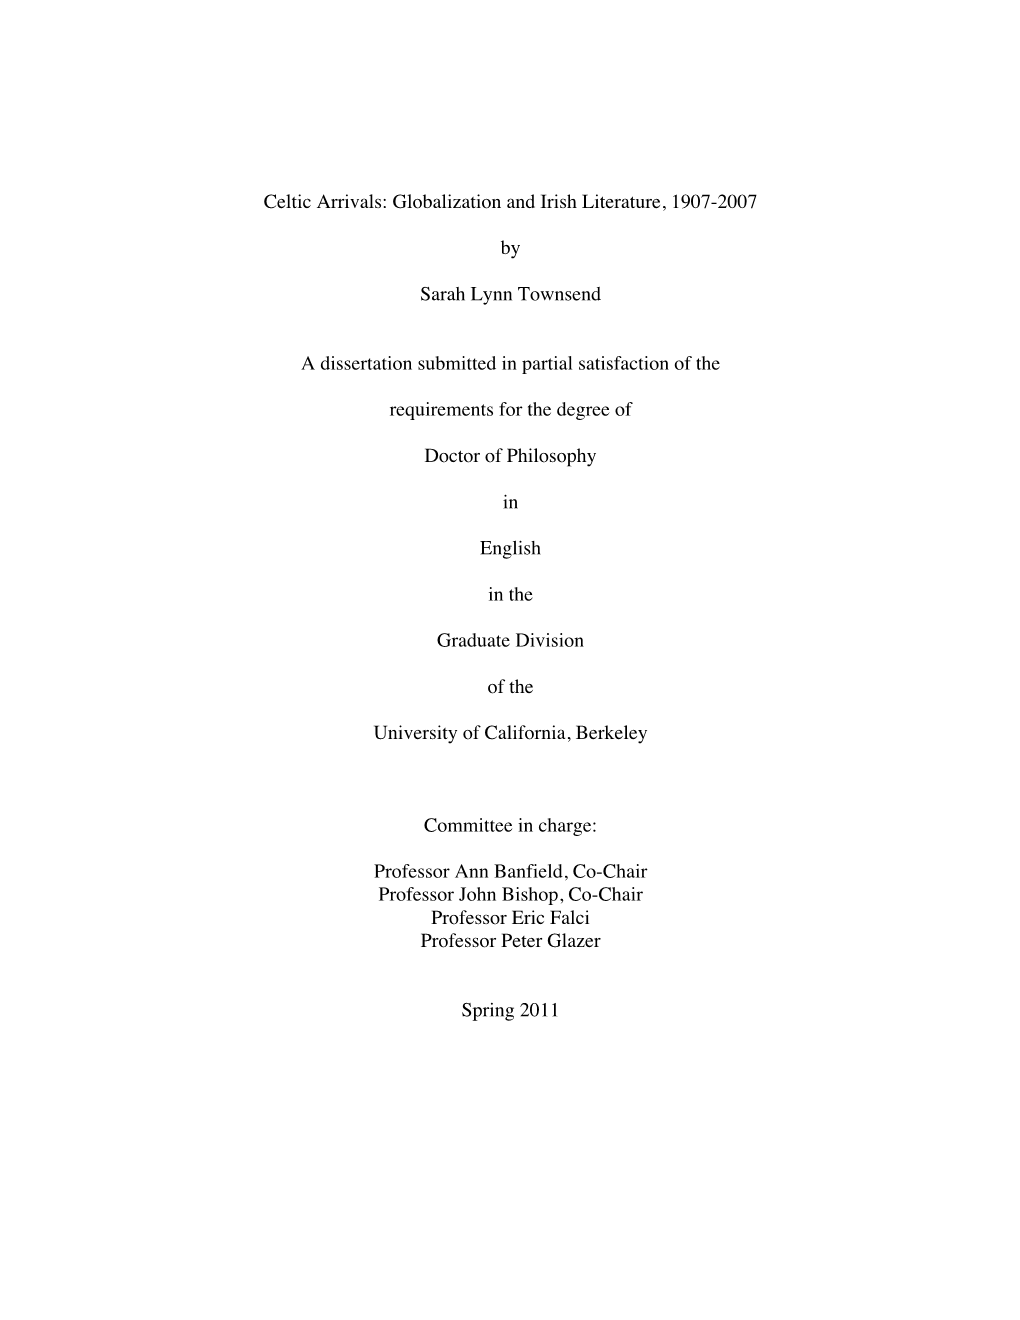 Celtic Arrivals: Globalization and Irish Literature, 1907-2007 by Sarah Lynn Townsend a Dissertation Submitted in Partial Satisf